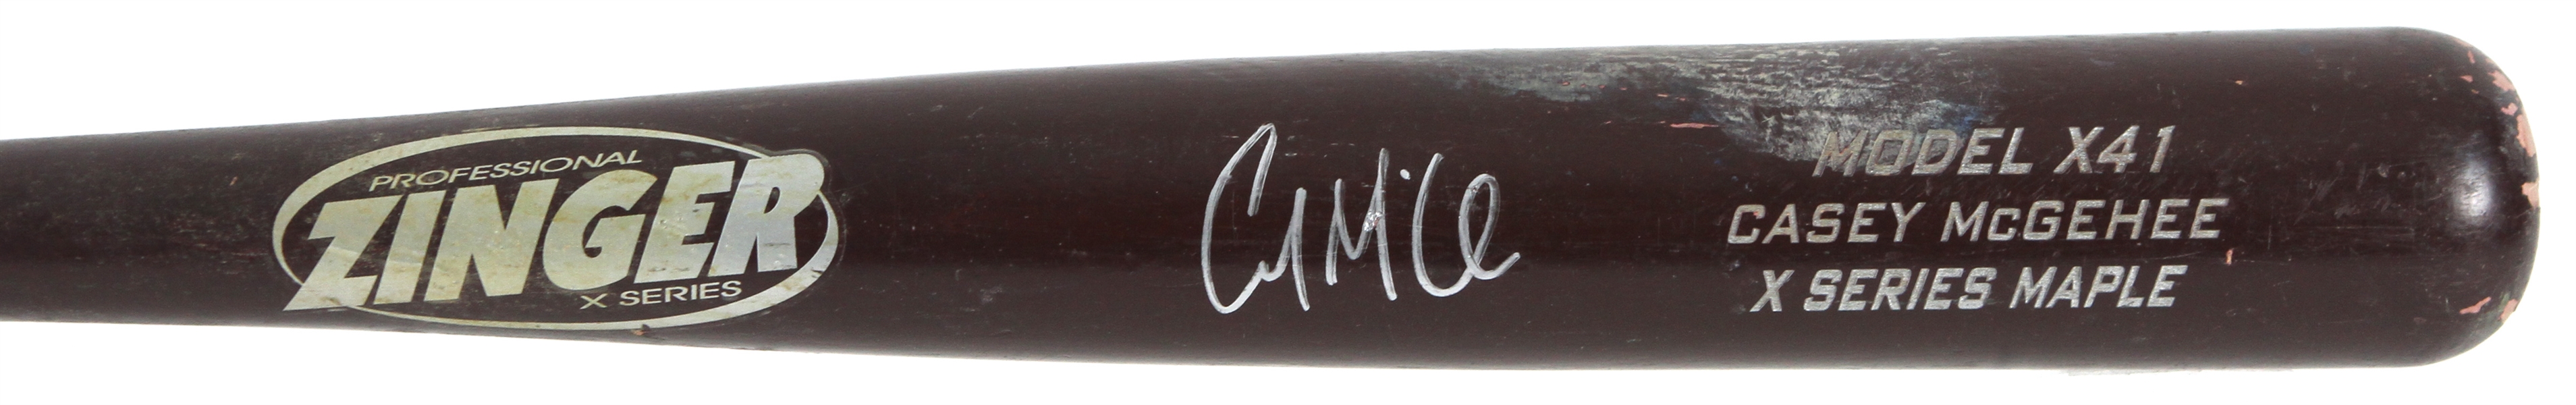 2009-11 Casey McGehee Milwaukee Brewers Signed Zinger Professional Model Game Used Bat (MEARS LOA/JSA)